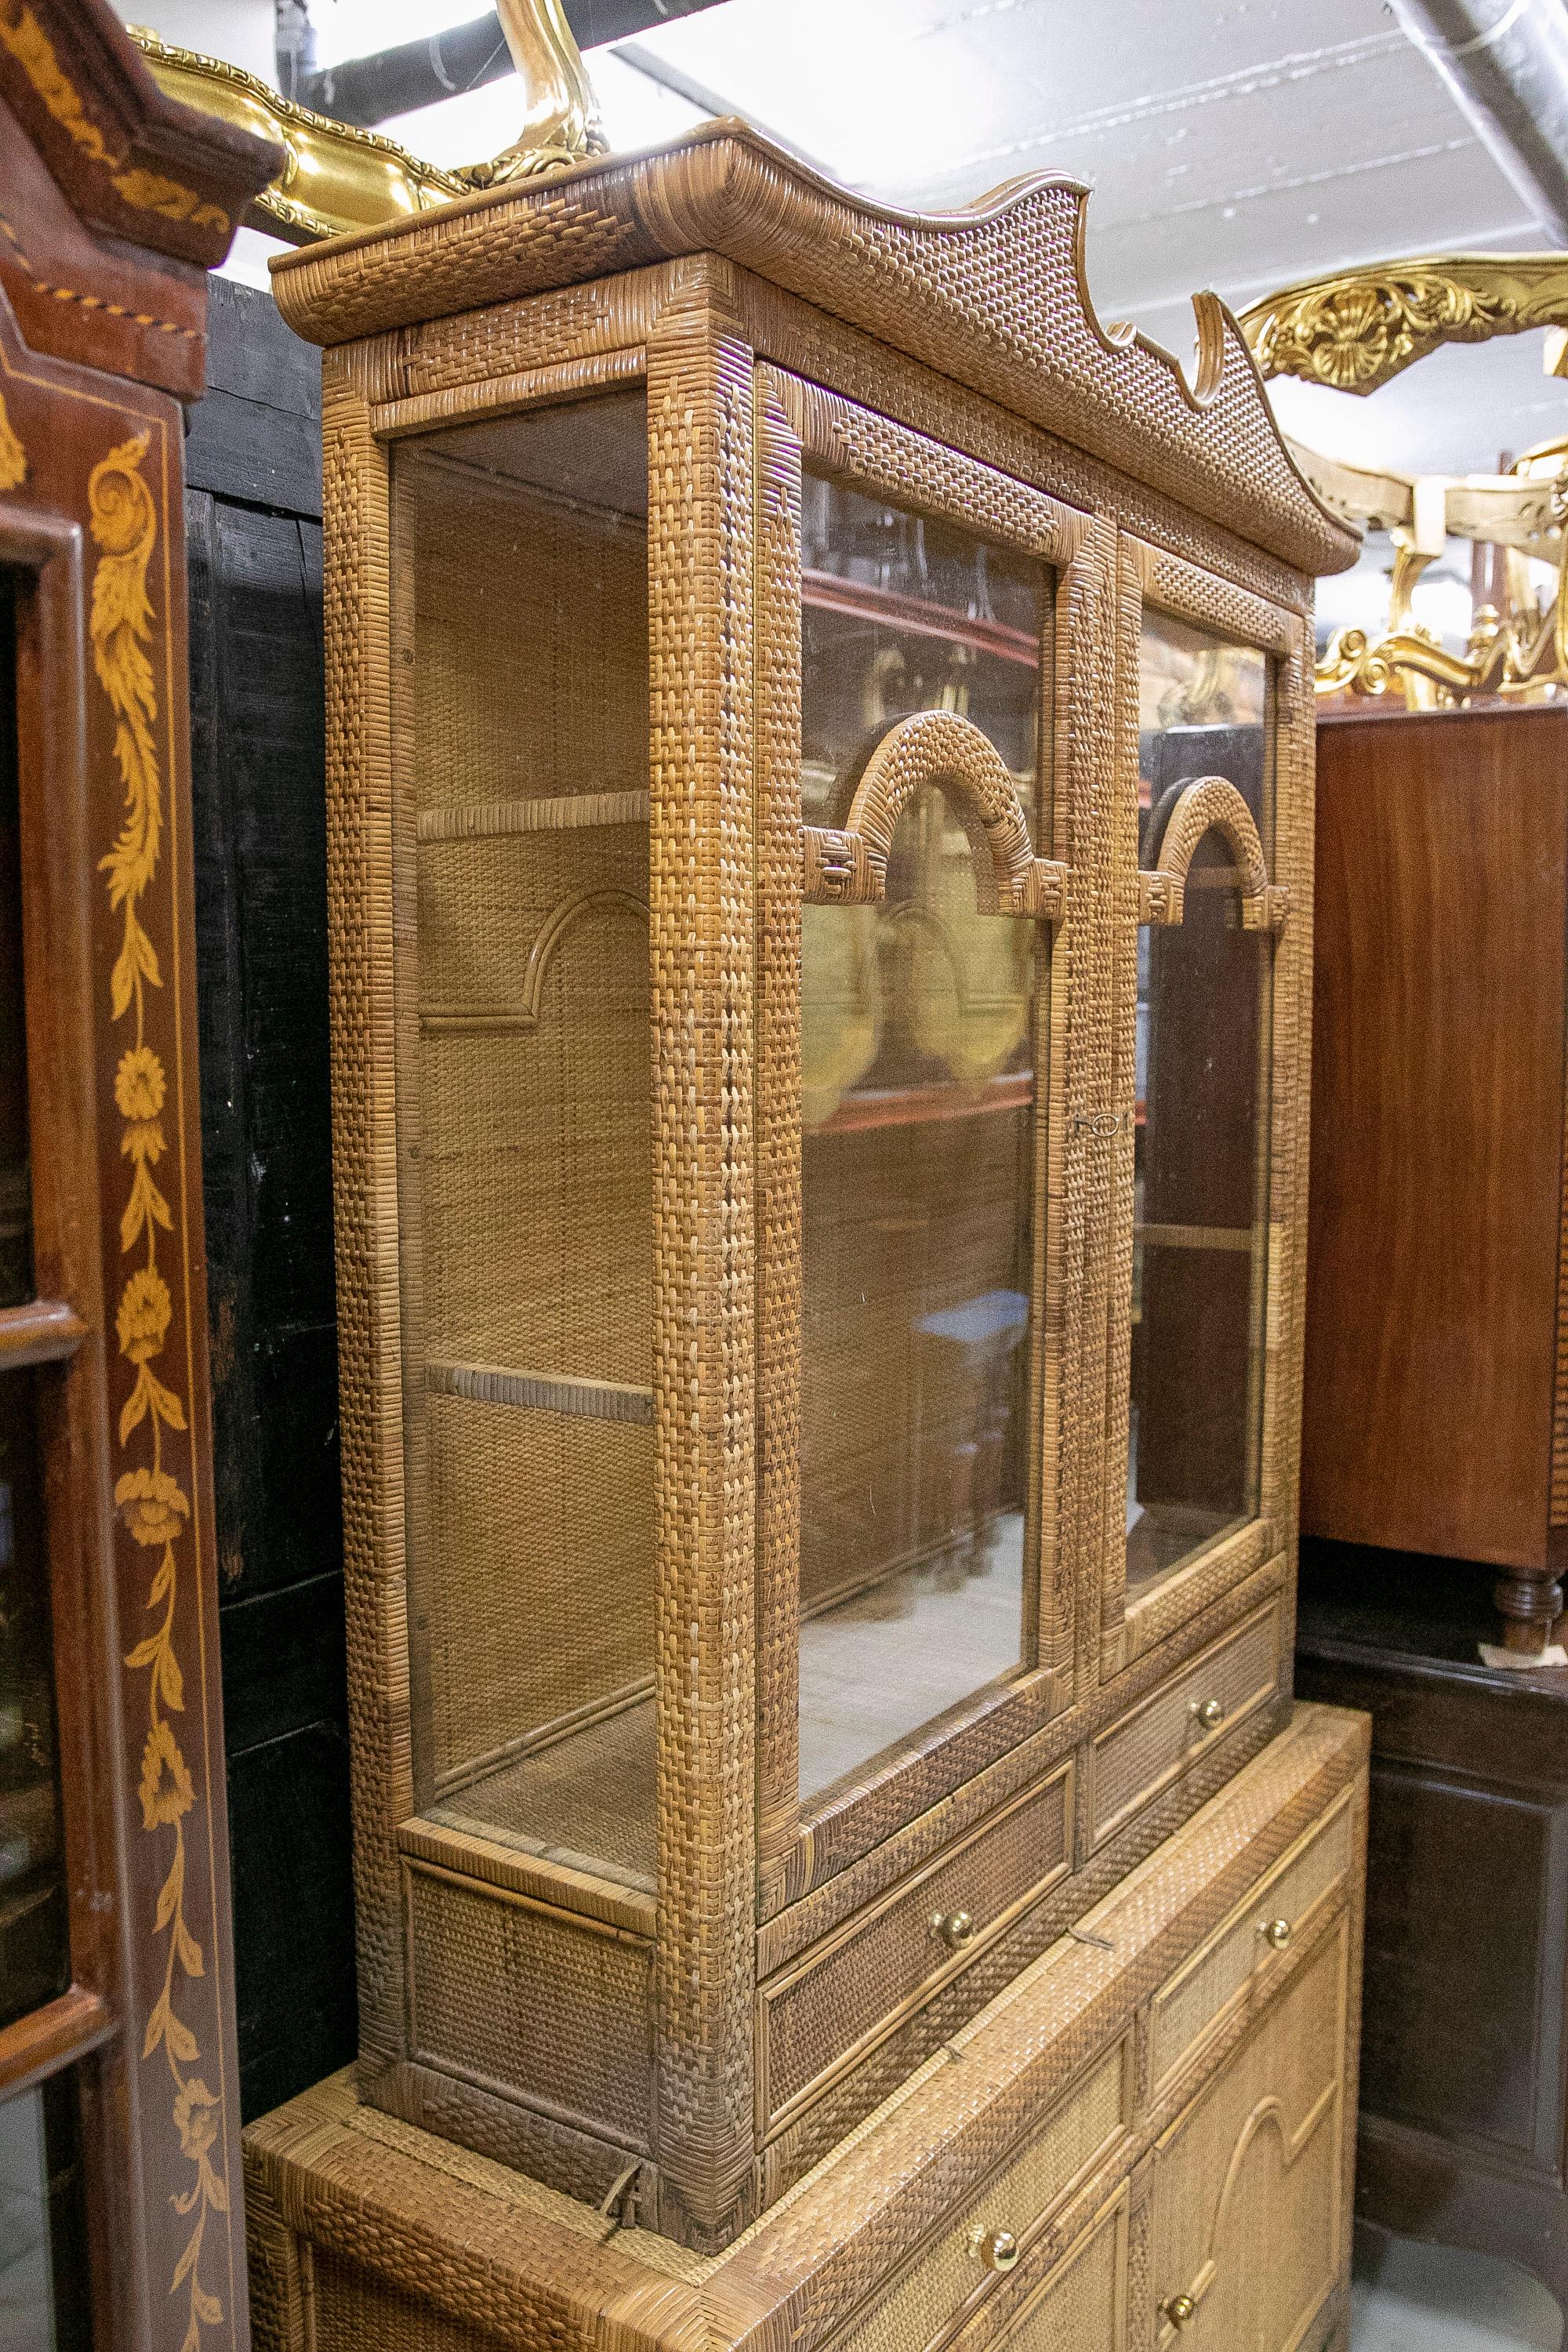 Spanish handmade wicker display cabinet with drawers and doors. Glass in the upper part with shelves inside, wooden frame and decorated with hand sewn wicker from the 1970s.